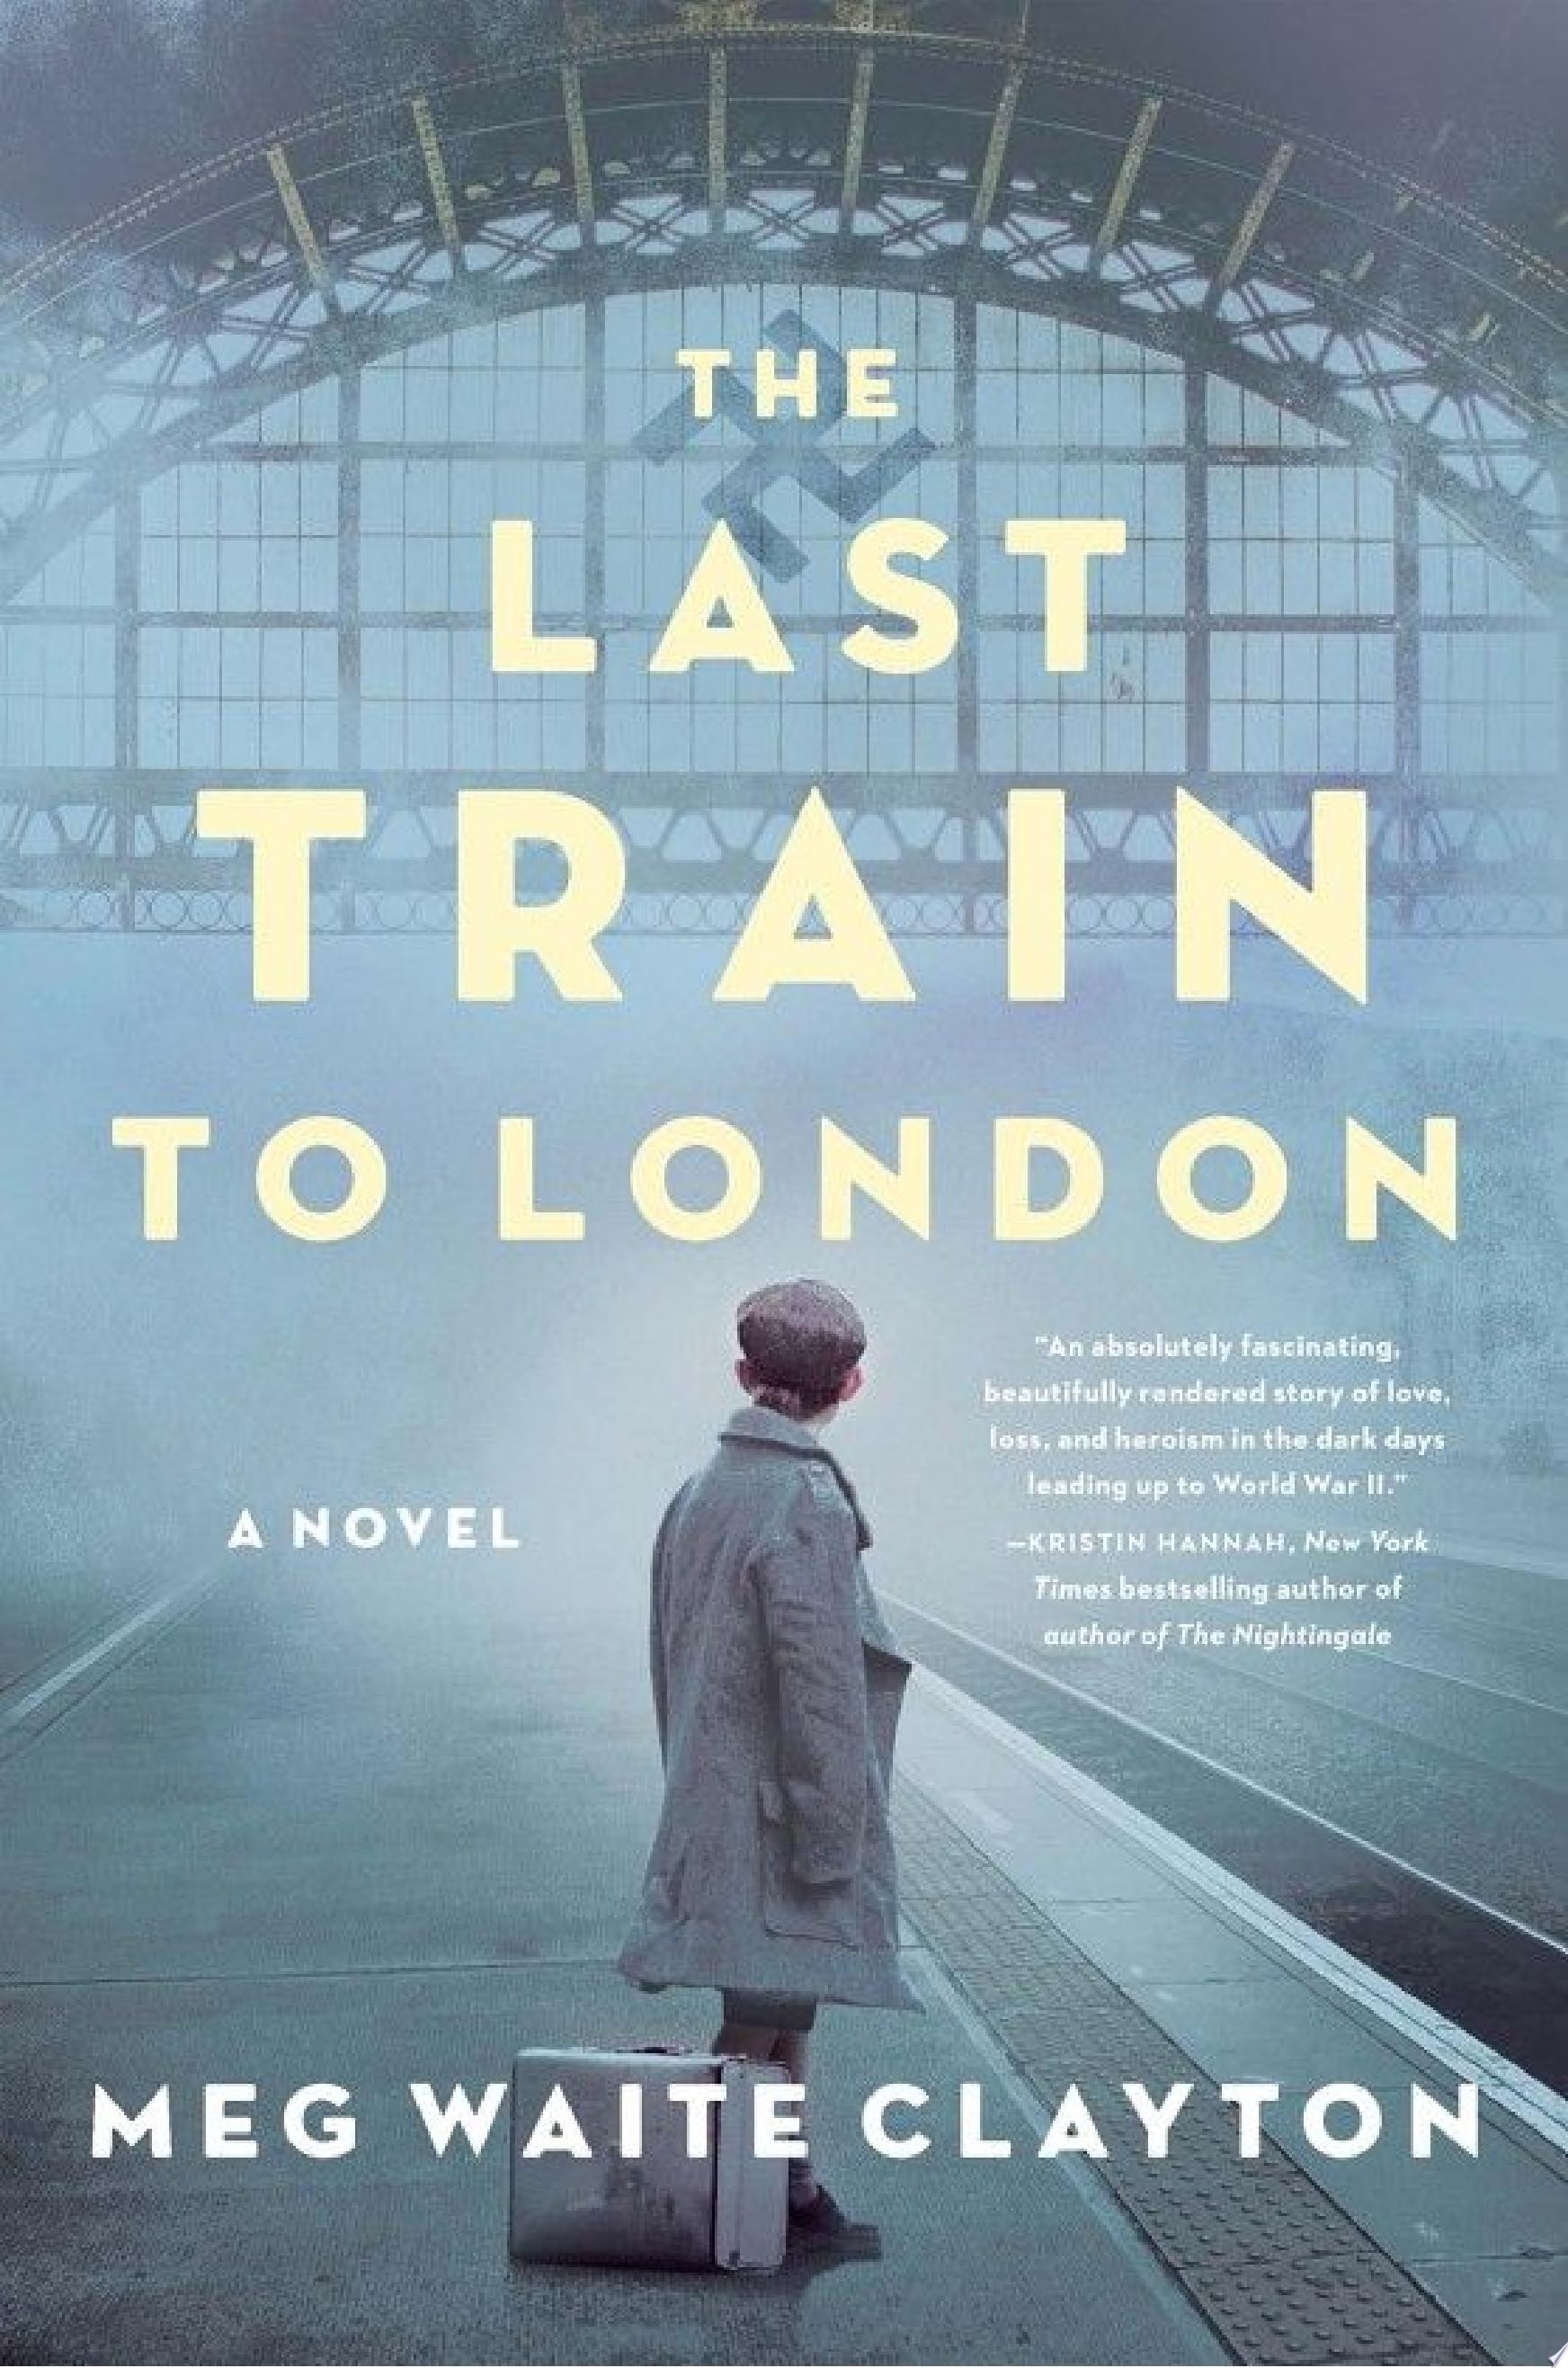 Image for "The Last Train to London"